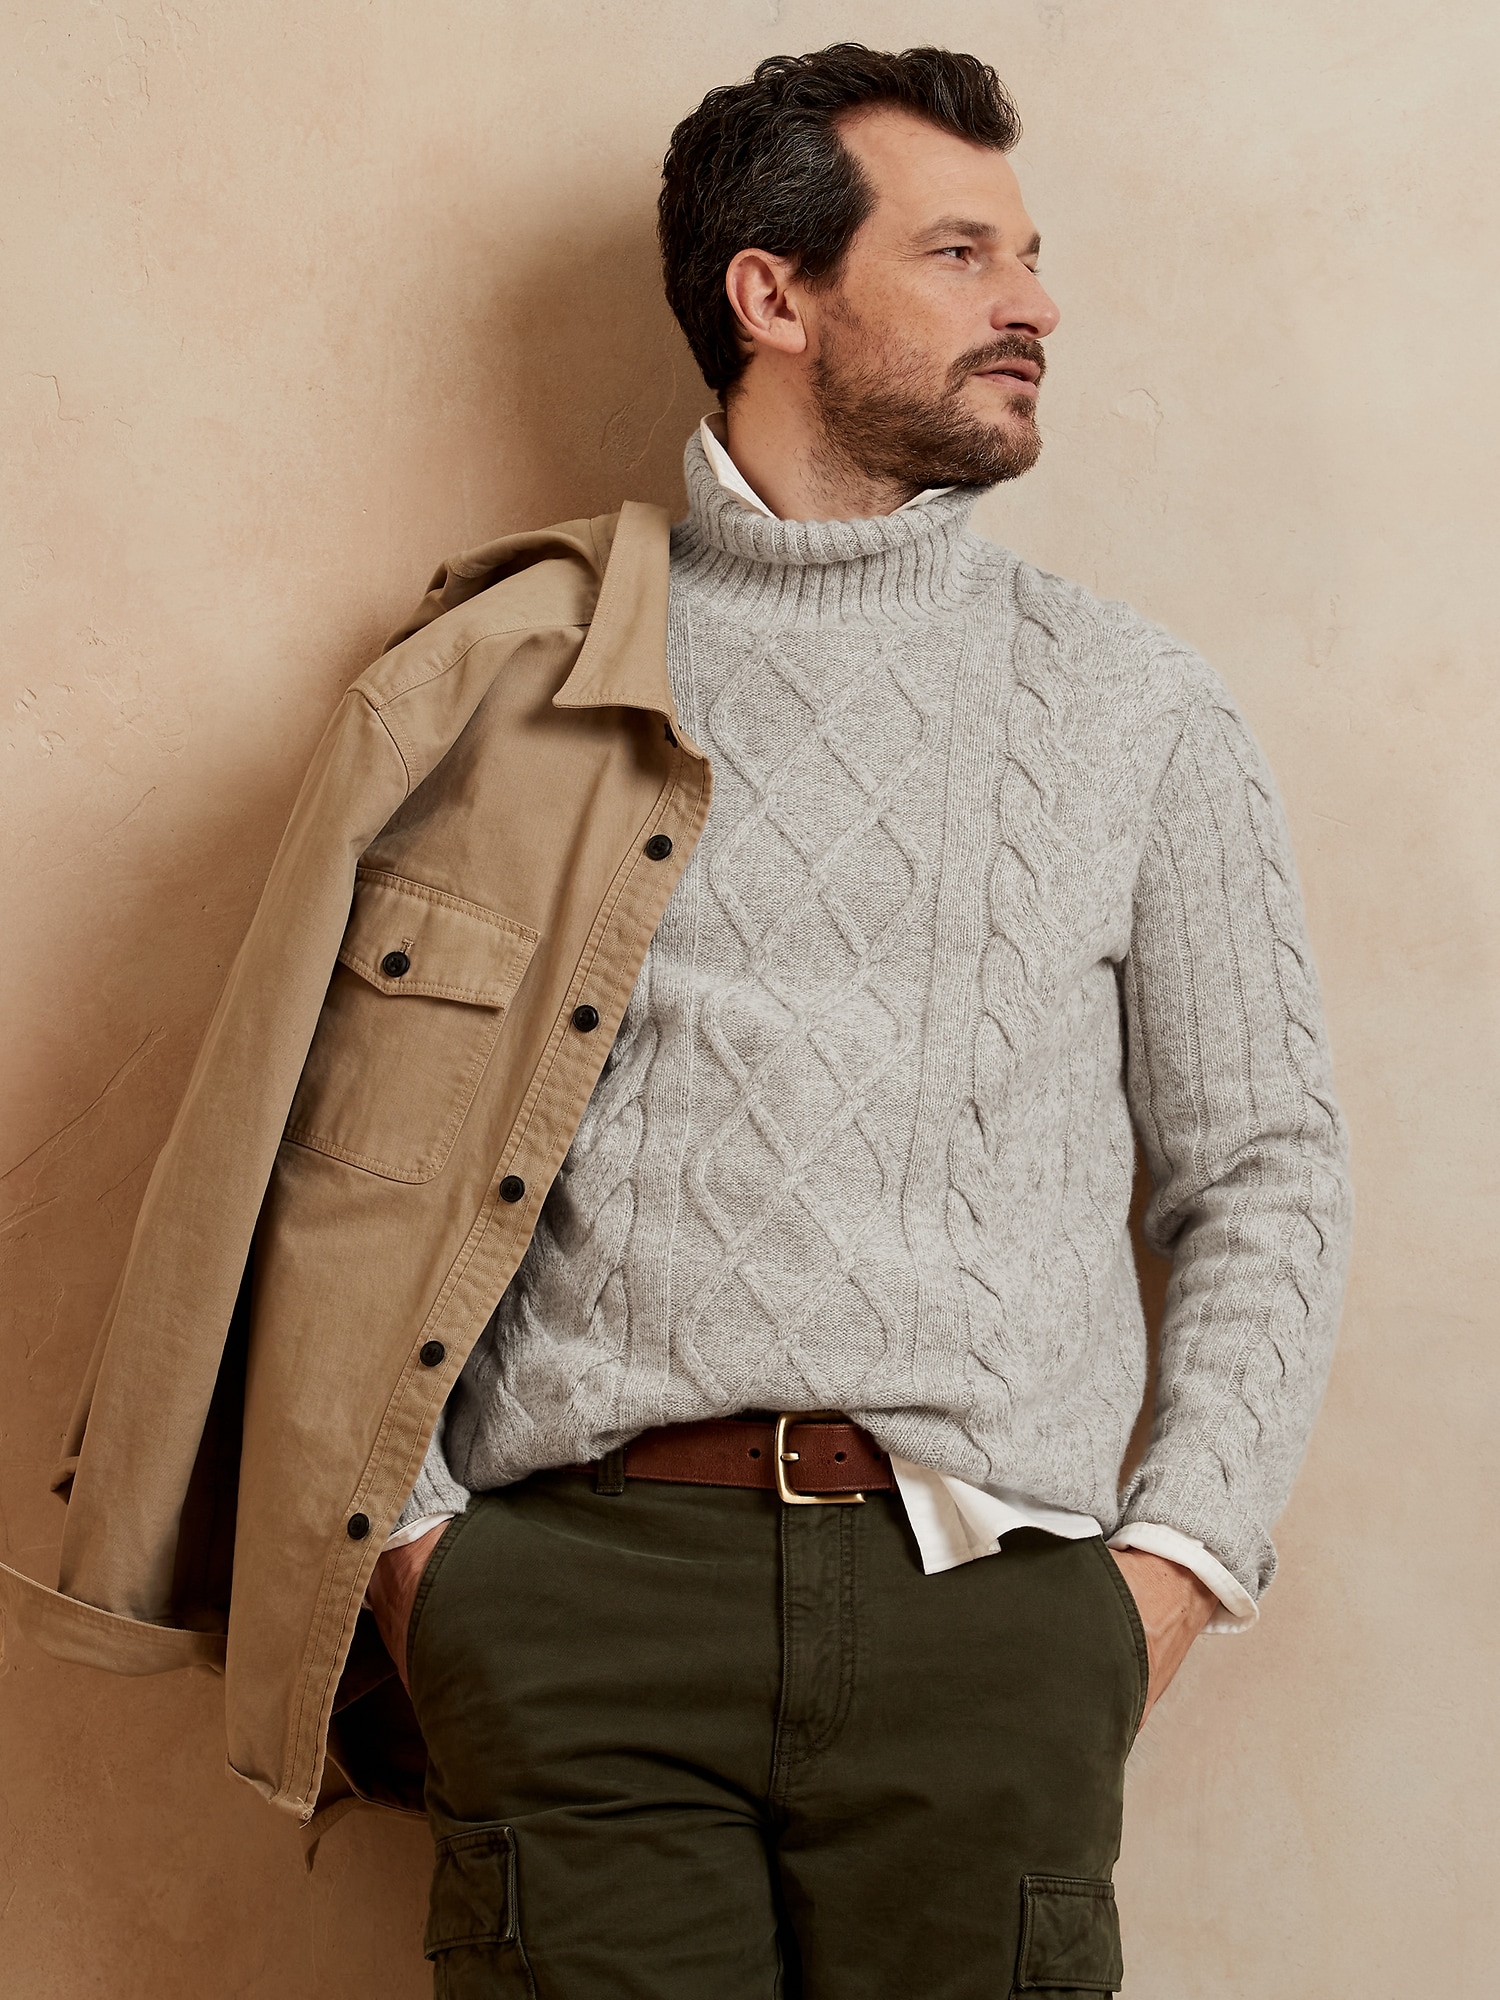 Italian Marbled Cable-Knit Sweater | Banana Republic